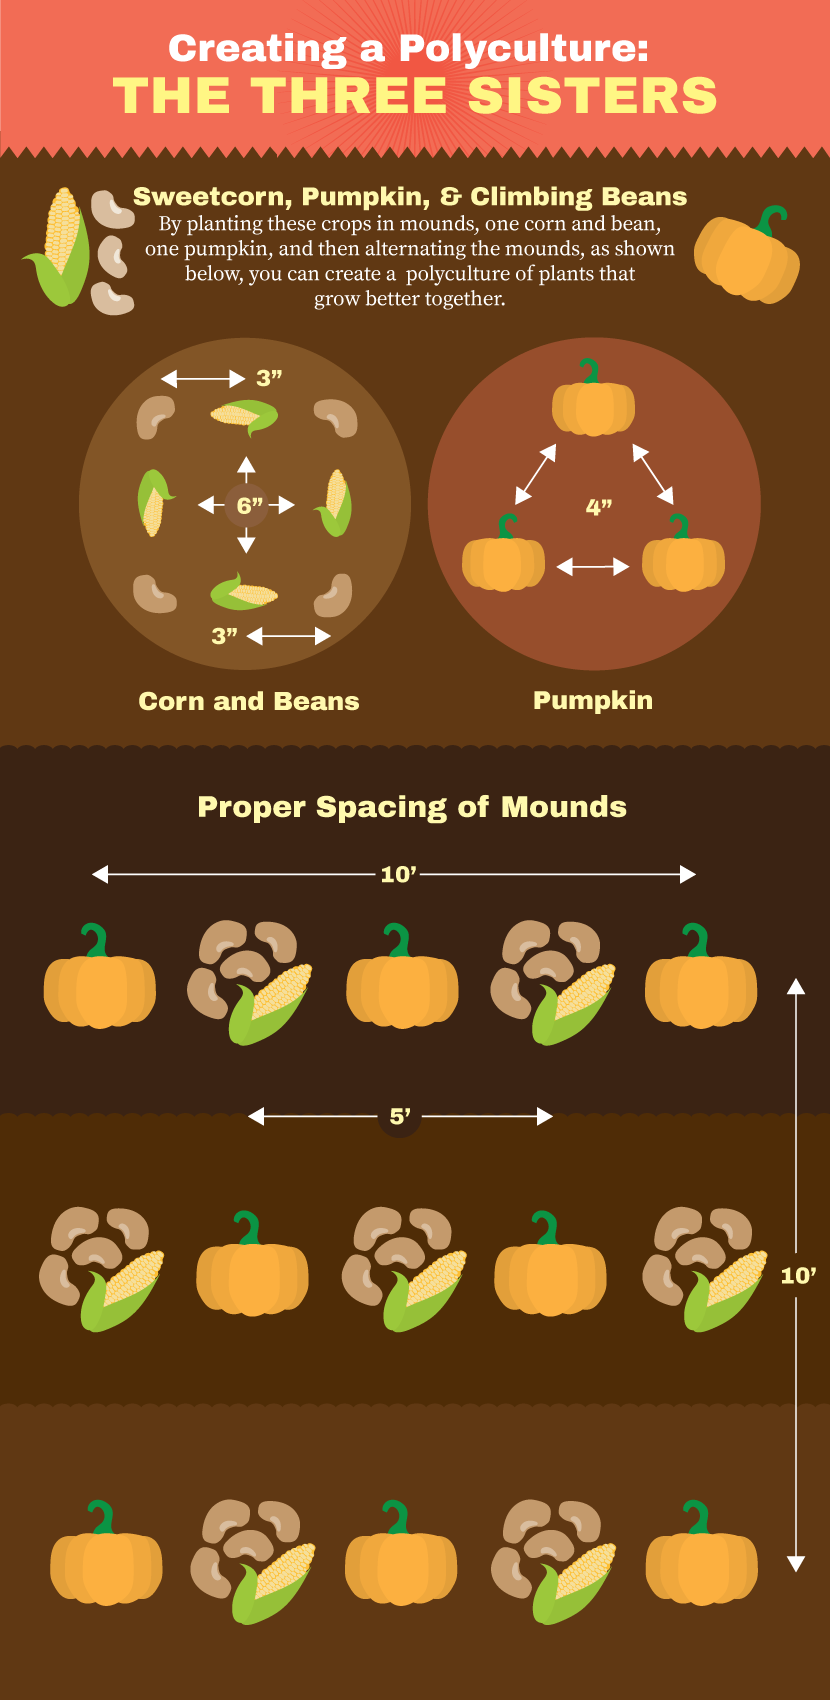 Perennial Plants for Your Garden: Polyculture of Three Sister Plants - Corn, Pumpkin, and Beans